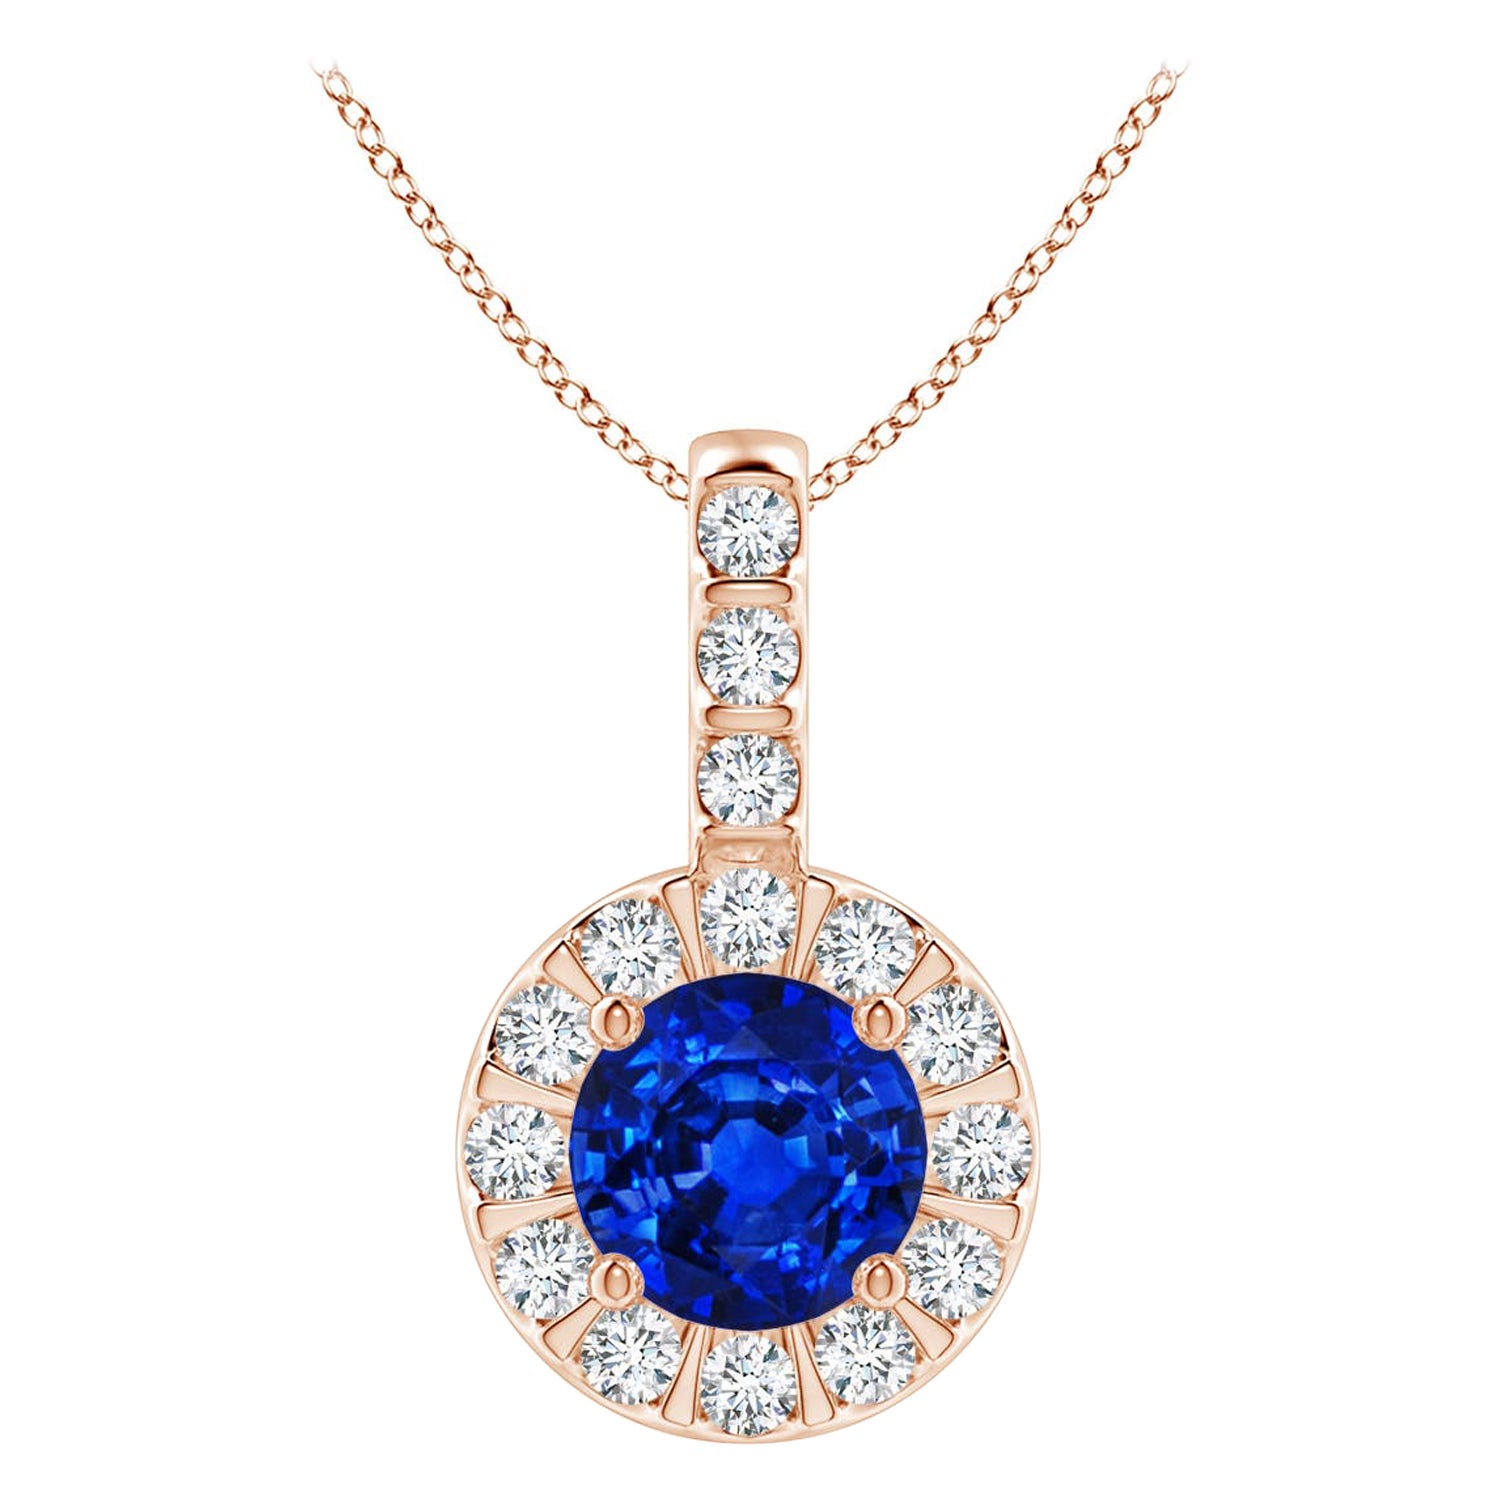 ANGARA Natural 0.60ct Blue Sapphire Pendant with Diamond Halo in 14K Rose Gold